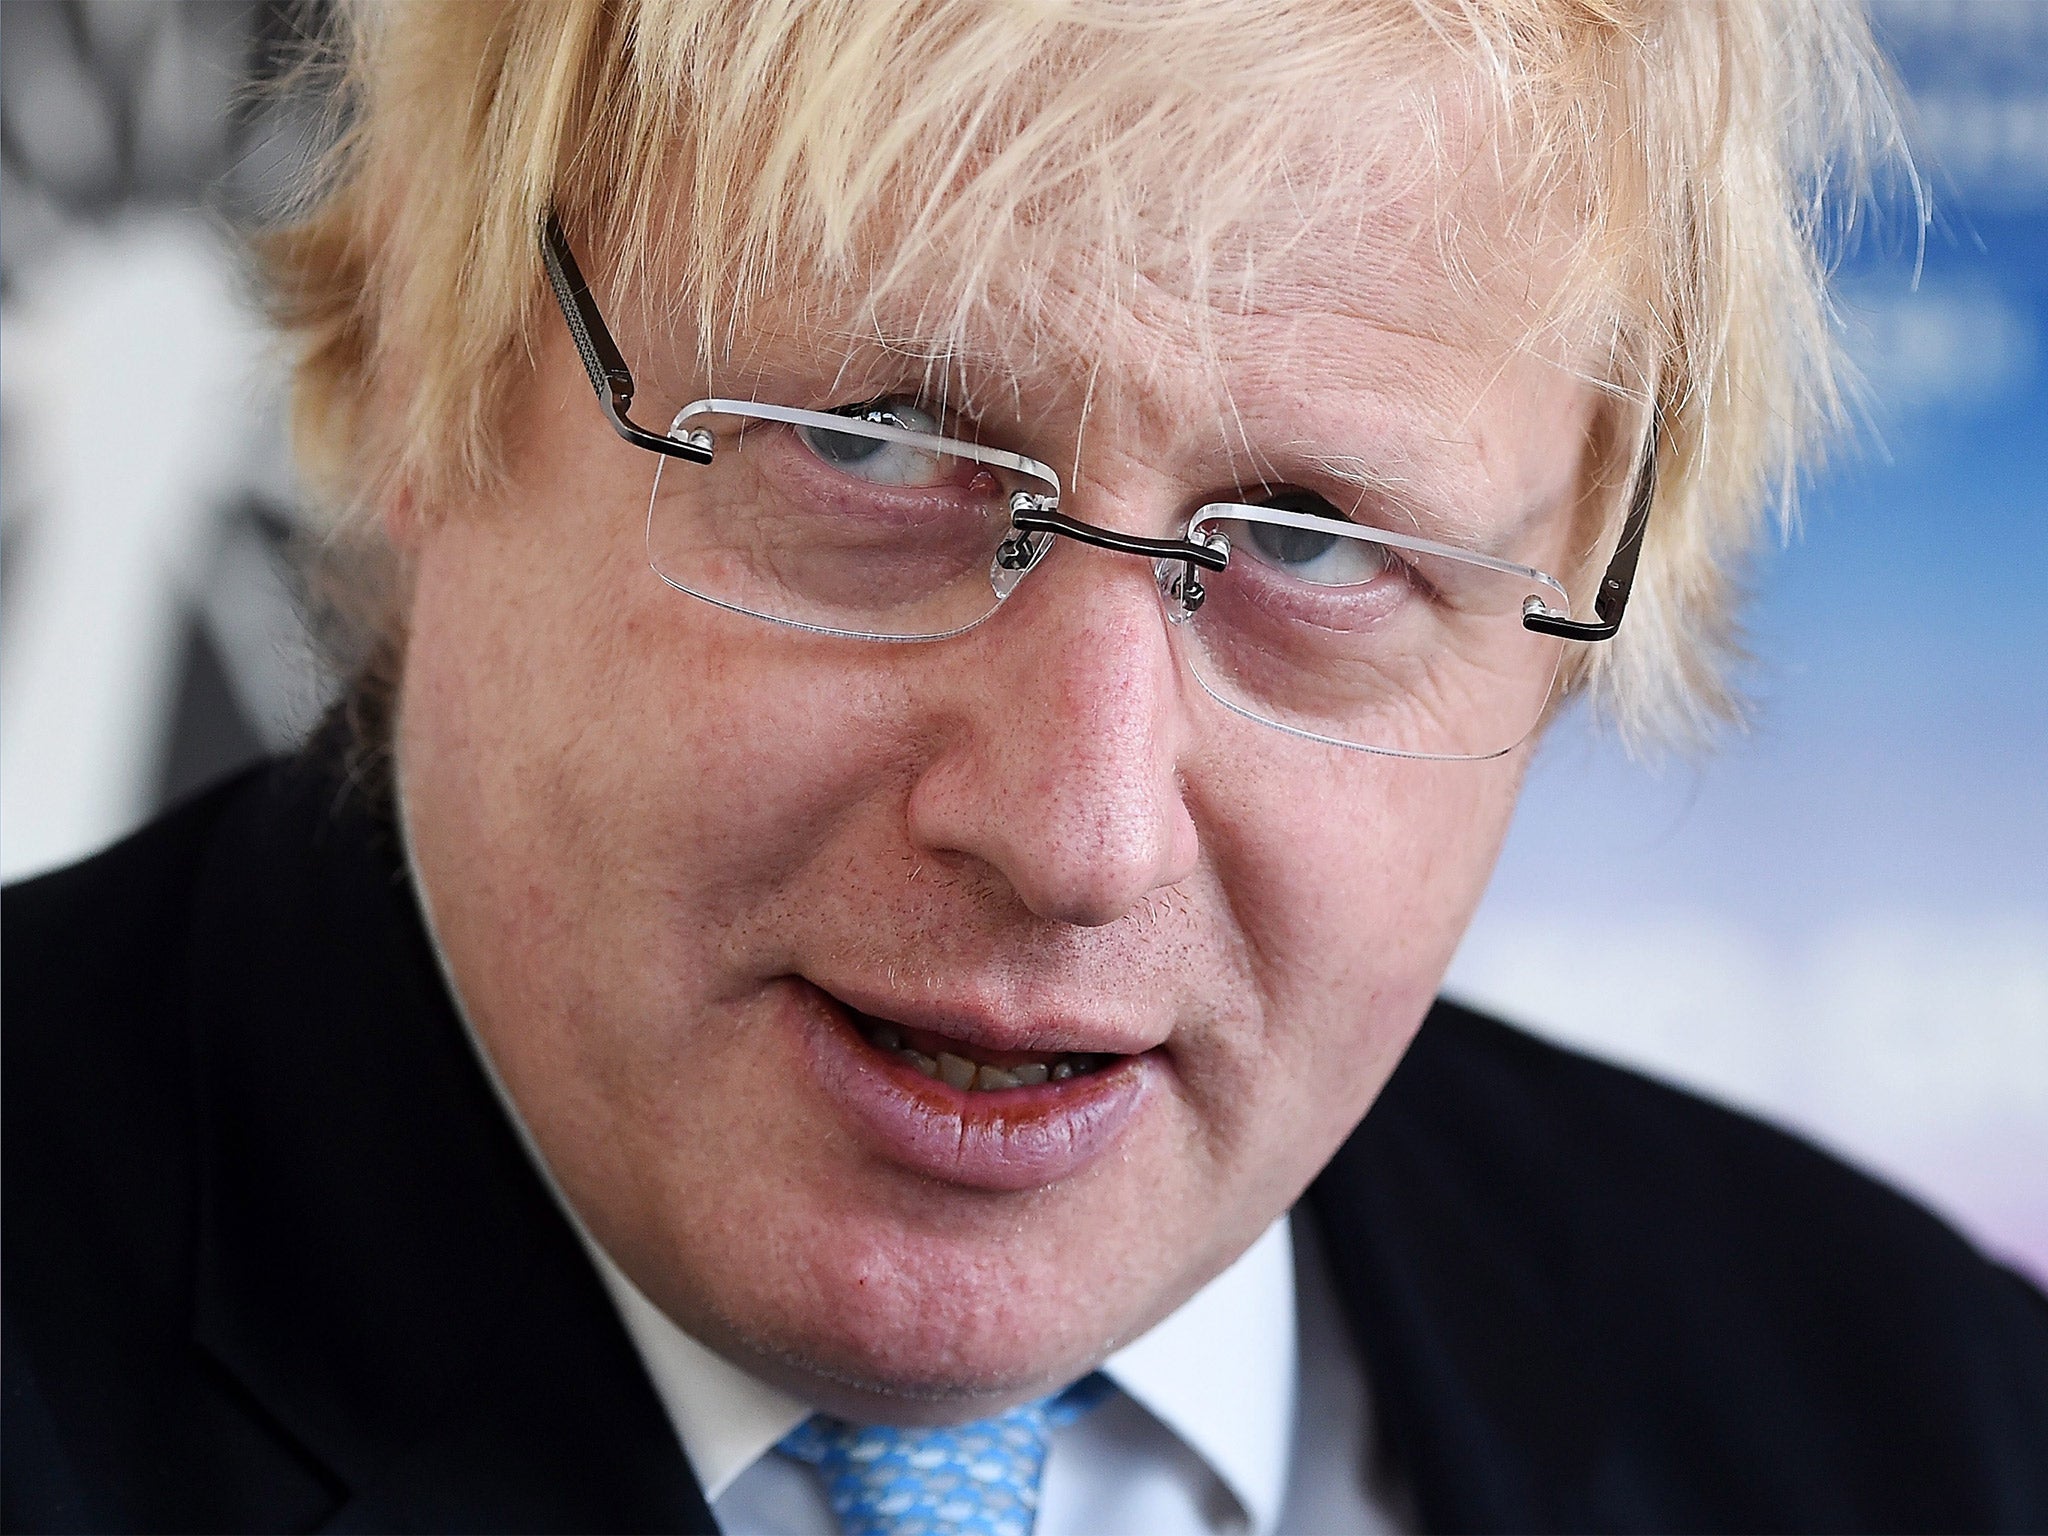 Boris Johnson may live to regret the Britain he helped create and presides over.